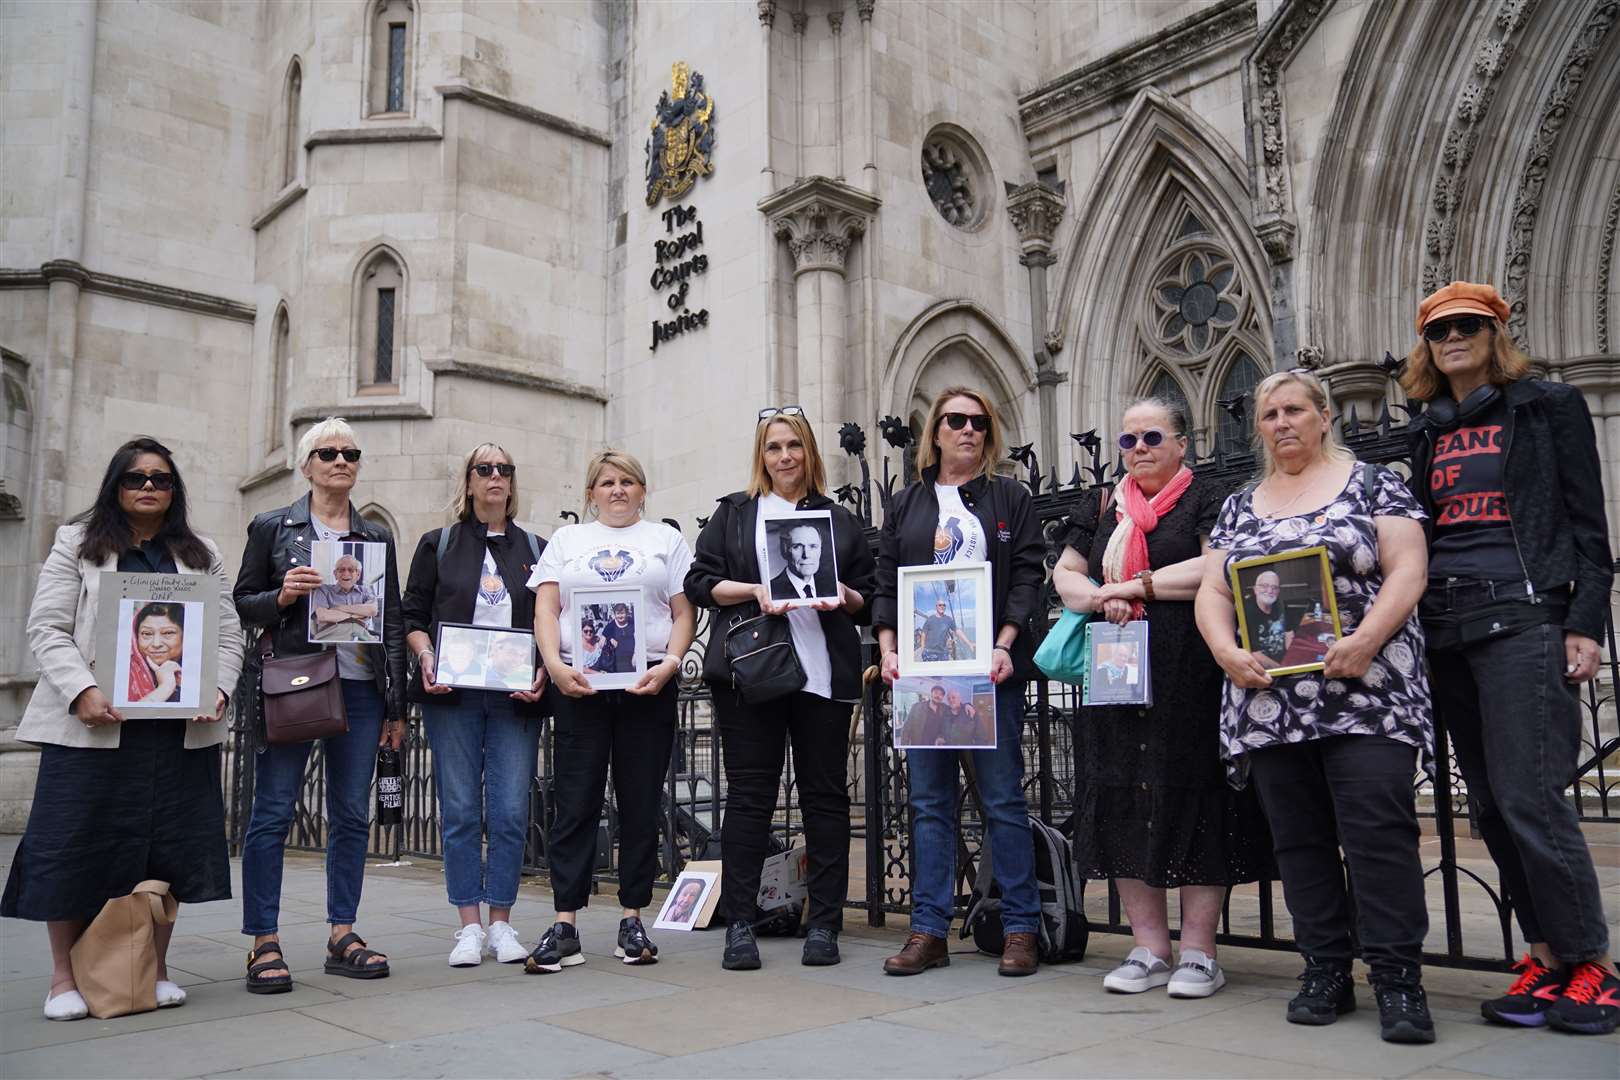 Several campaigners attended the hearing in London in June (Lucy North/PA)